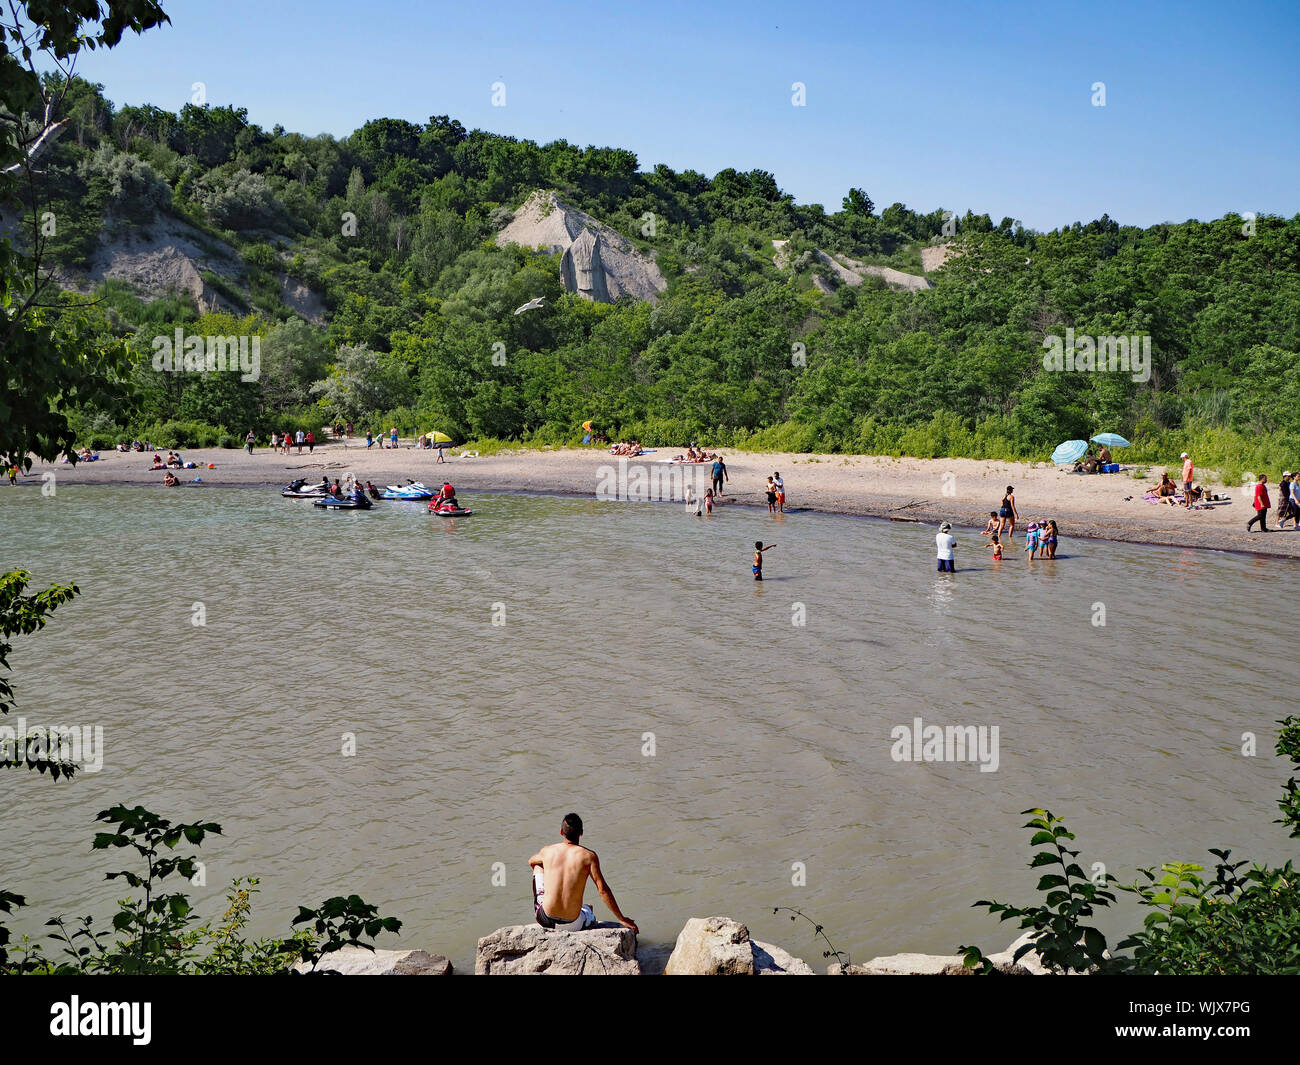 TORONTO - JULY 2018:  The shallow lagoons on the edges of Lake Ontario near the Scarborough Bluffs are popular locations for swimming and boating. Stock Photo